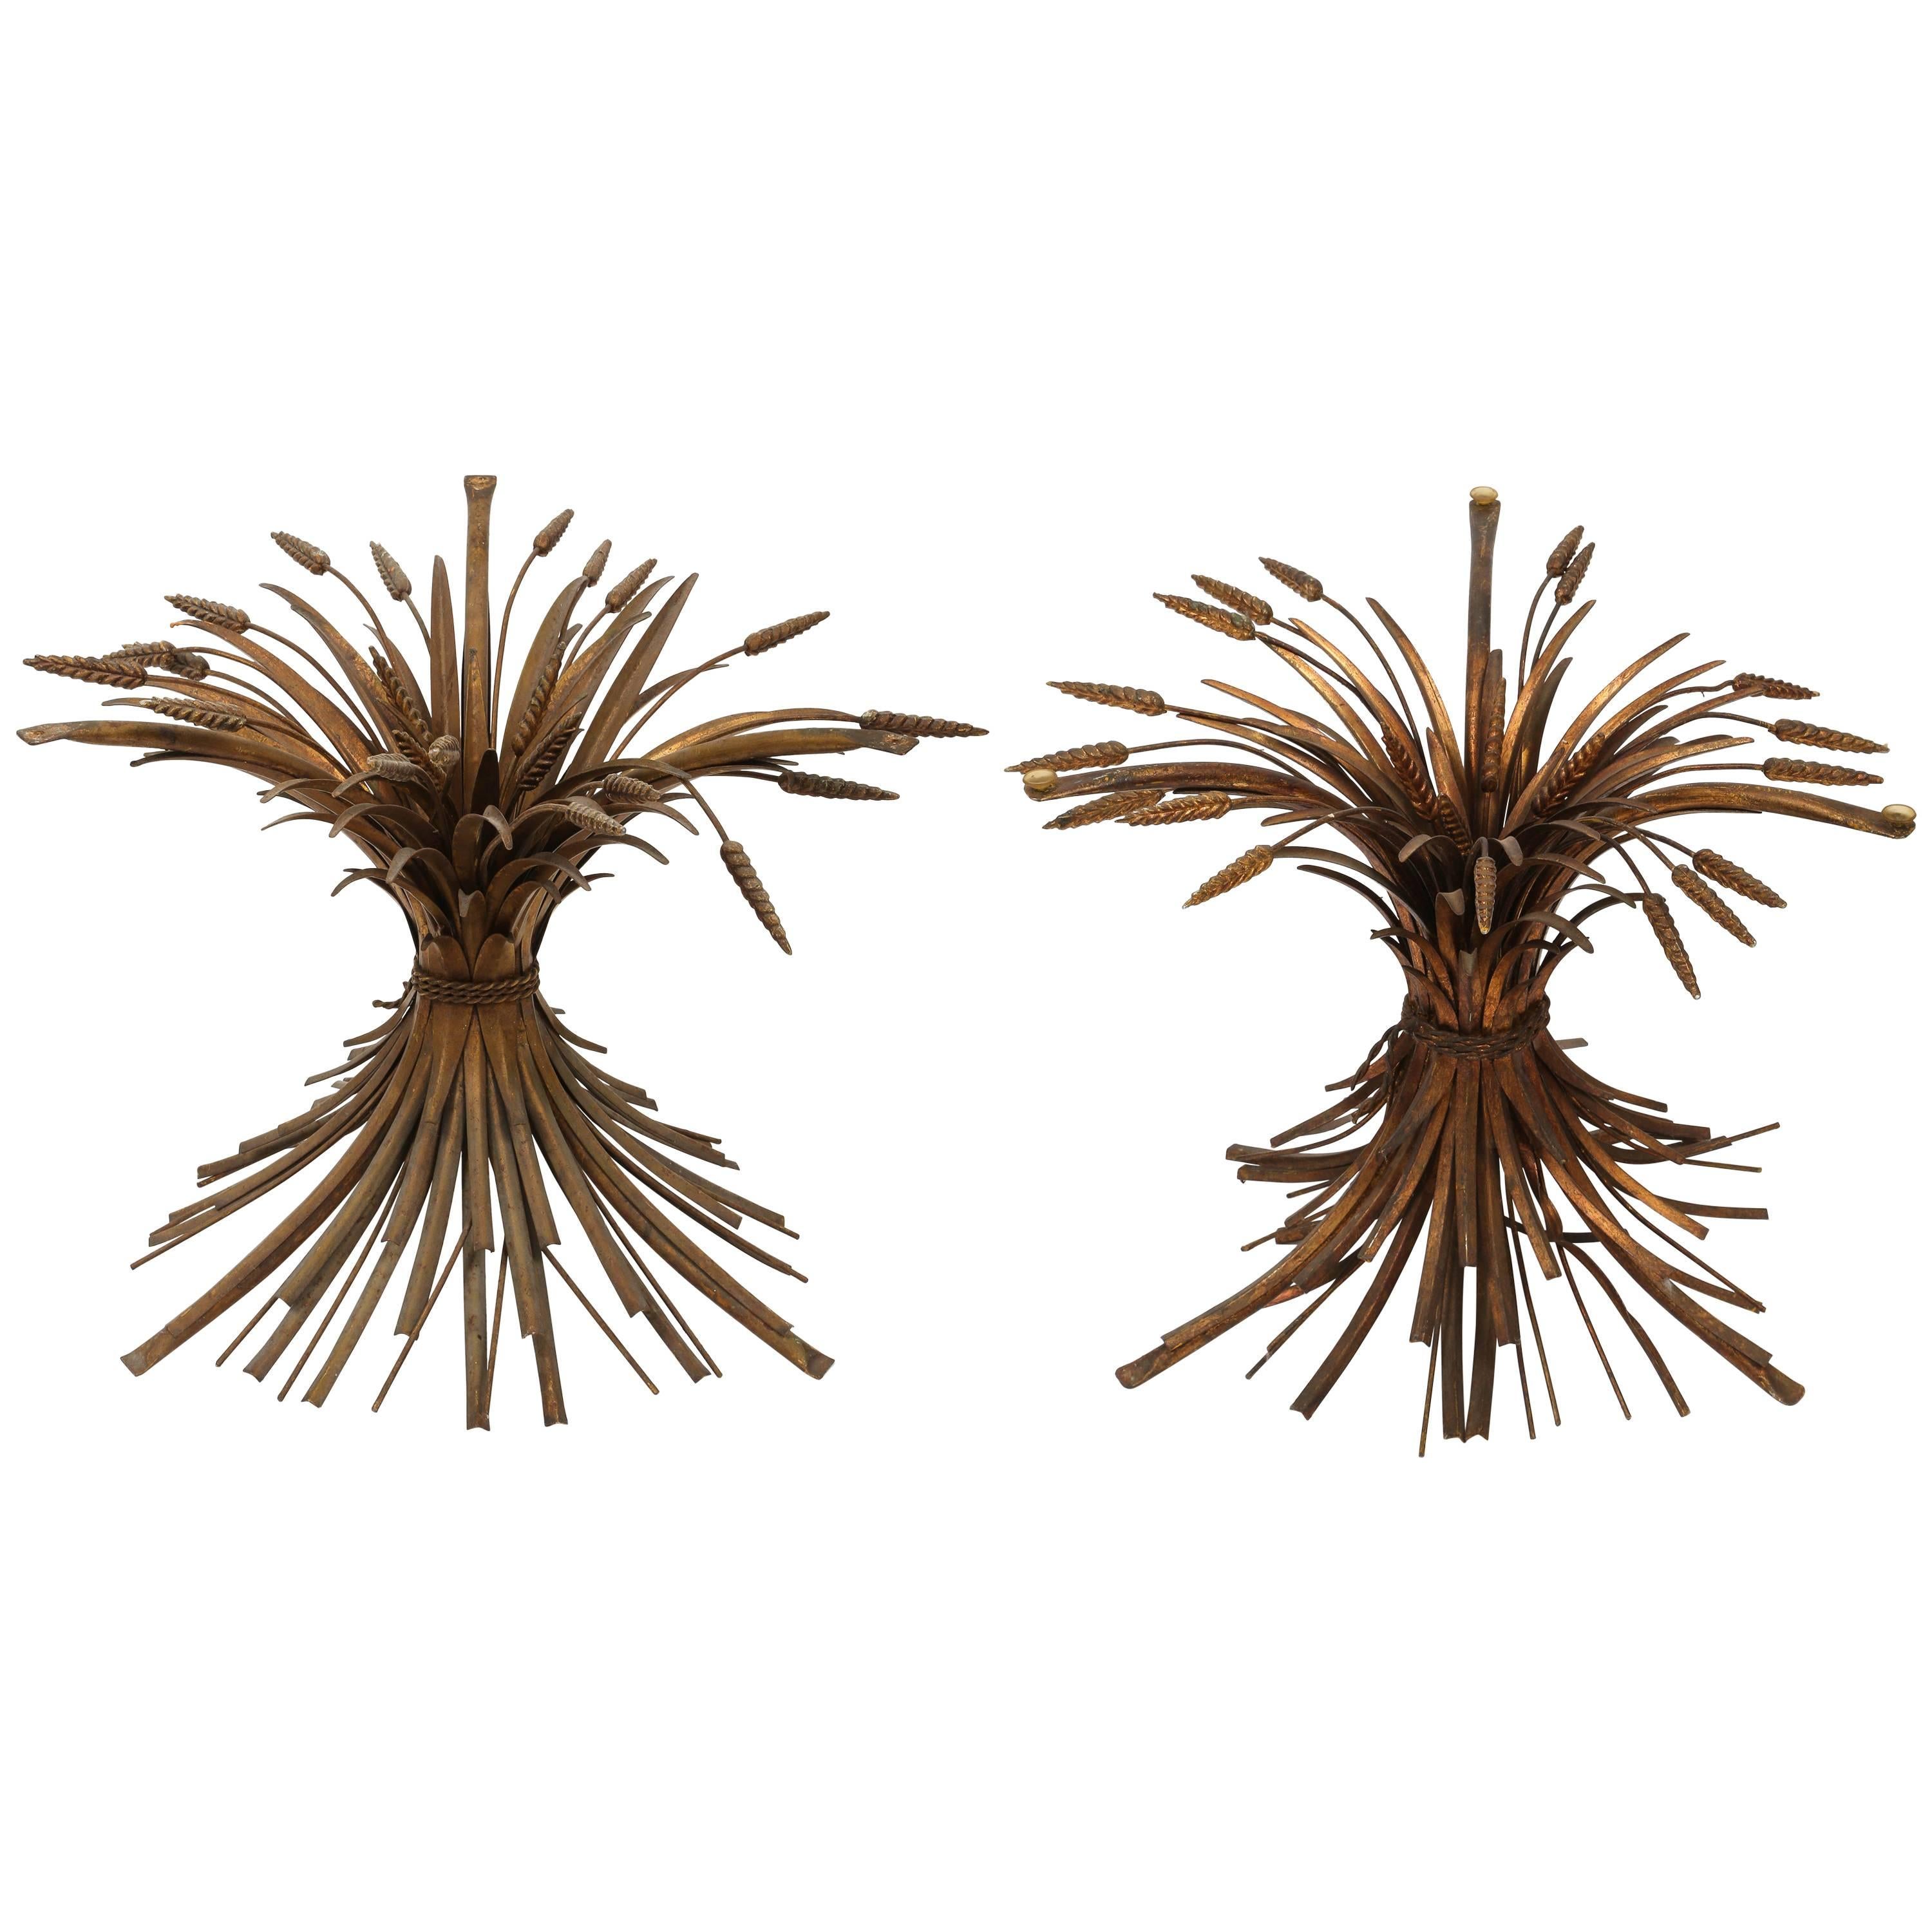 Pair of Gilt Bronze Wheat Sheaf Table Bases, Italy, 1940s